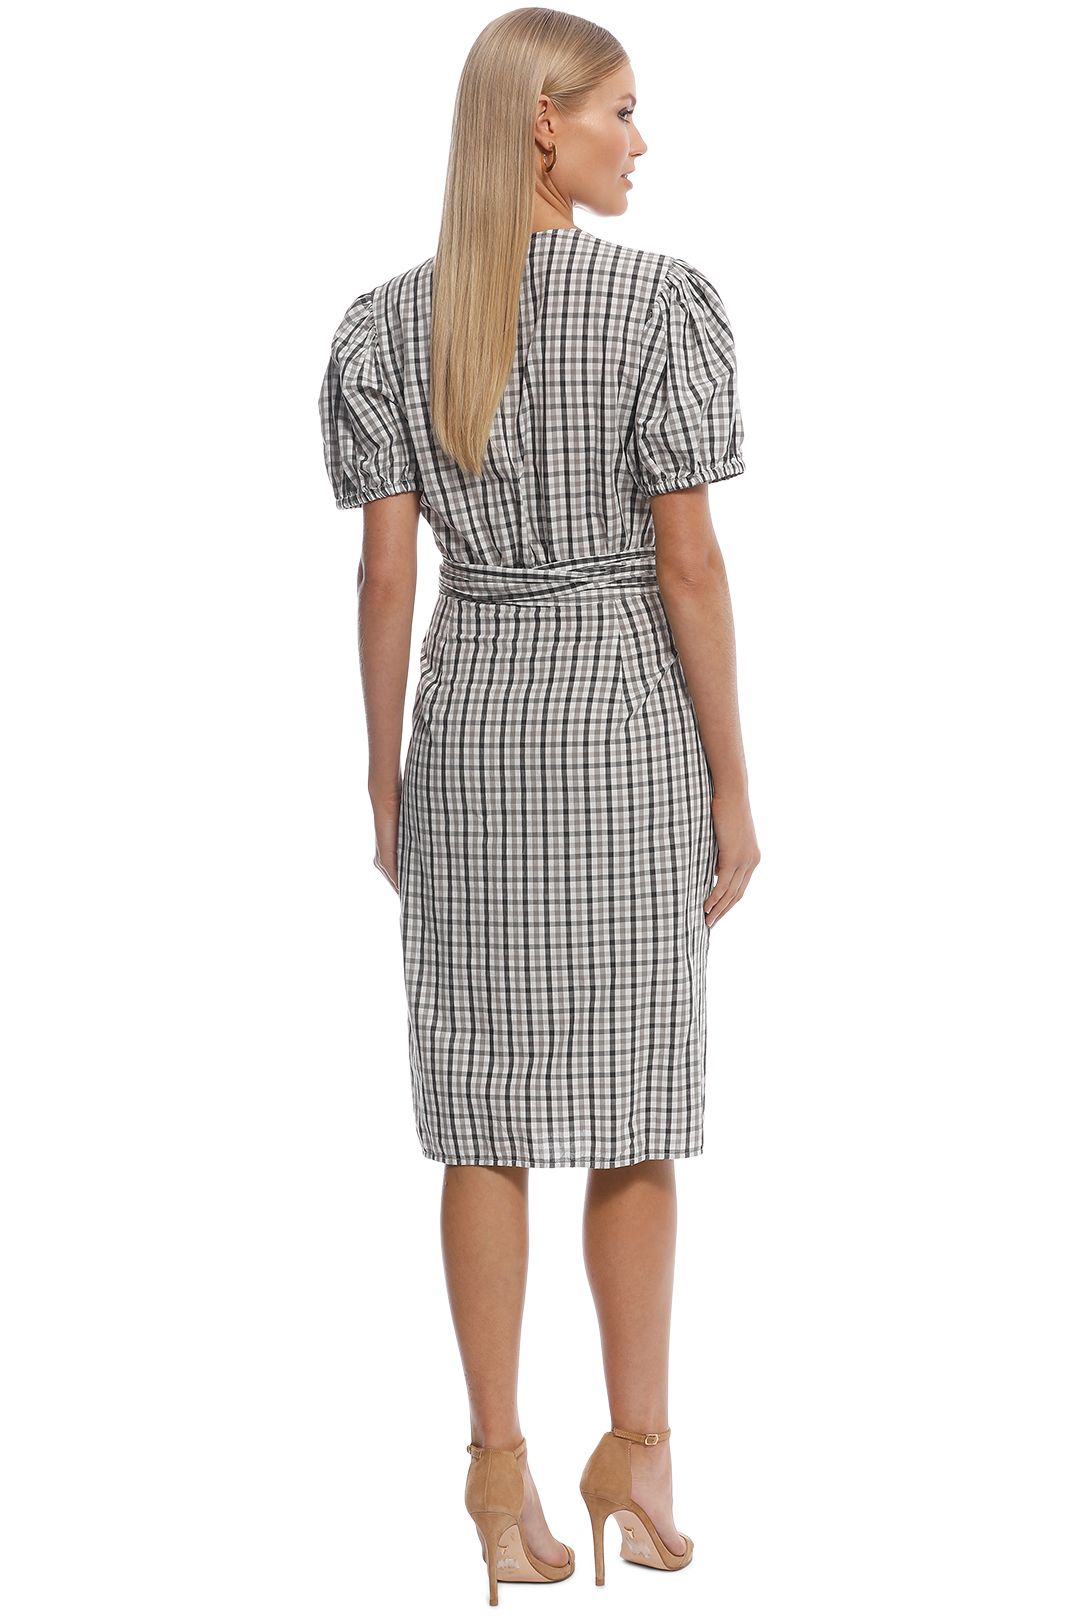 Scanlan Theodore - Gingham Wrap Front Dress - White - Back